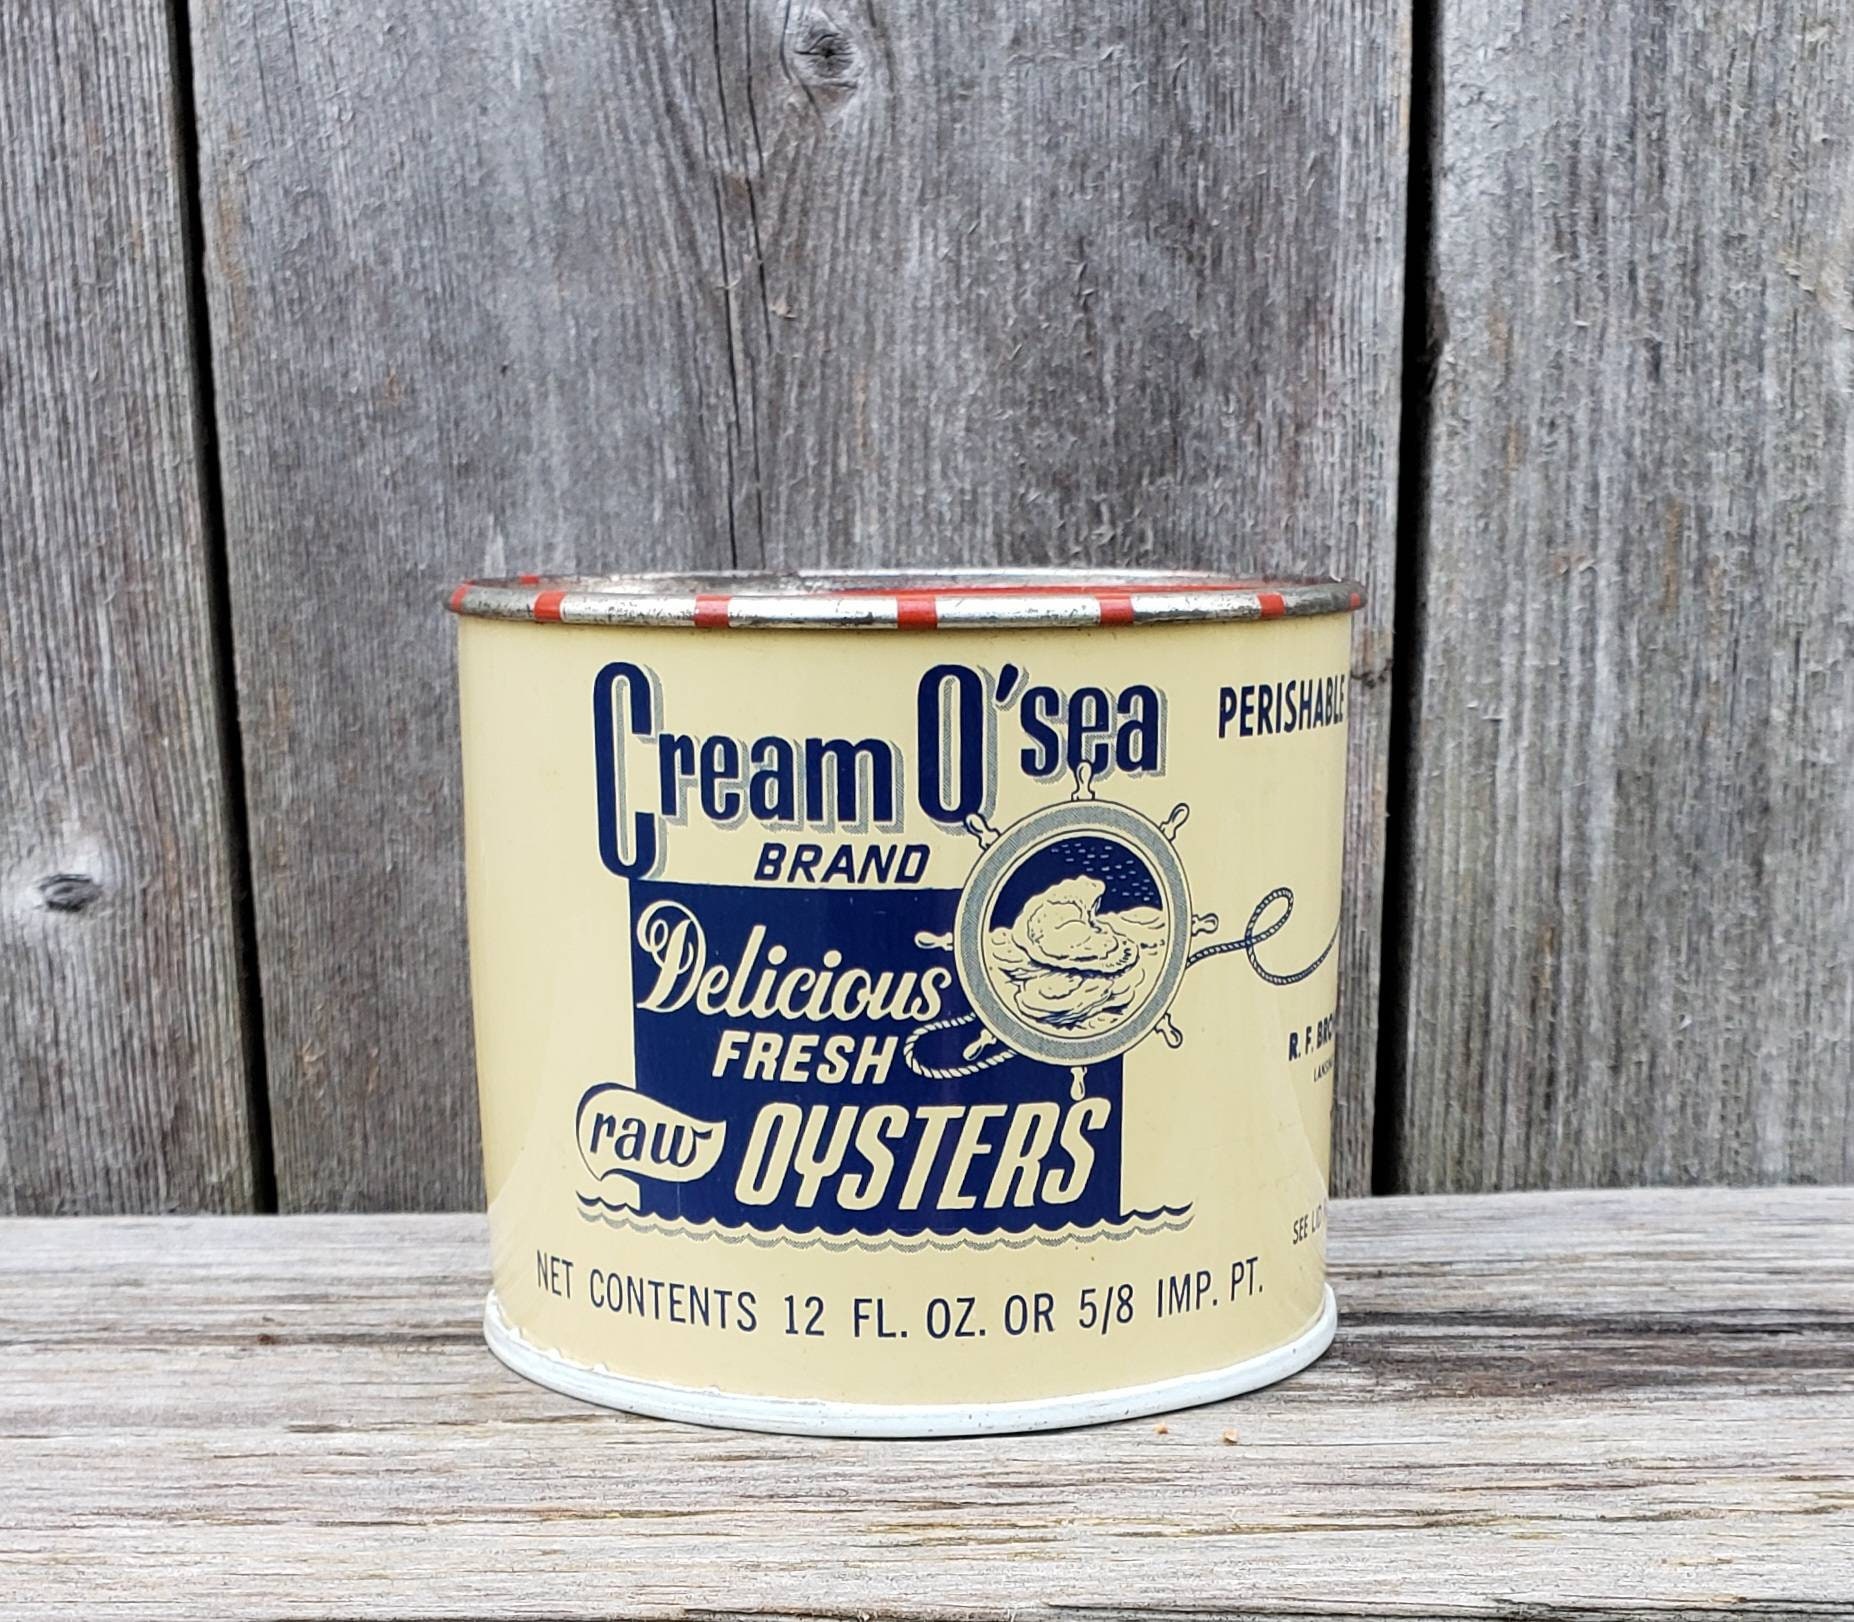 Cream O'sea Brand 12 Ounce Size Oyster Tin Advertising Can Lansing Michigan - Seafood Country Store Beach Cottage Decor